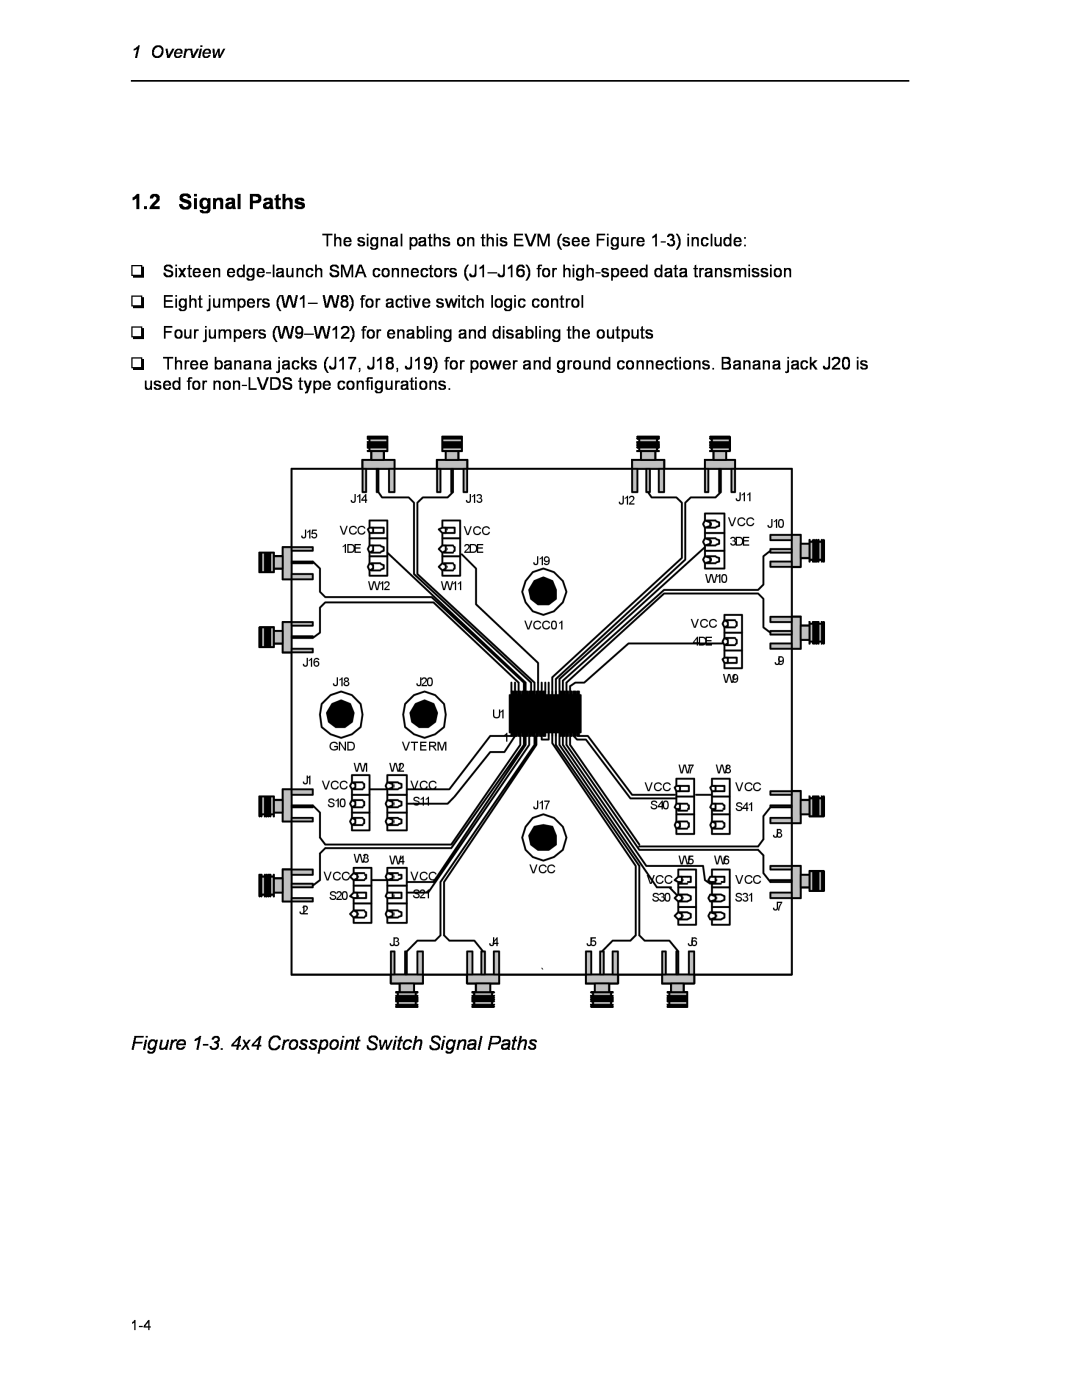 Texas Instruments HPL-D SLLU064A manual 3. 4x4 Crosspoint Switch Signal Paths, Overview 